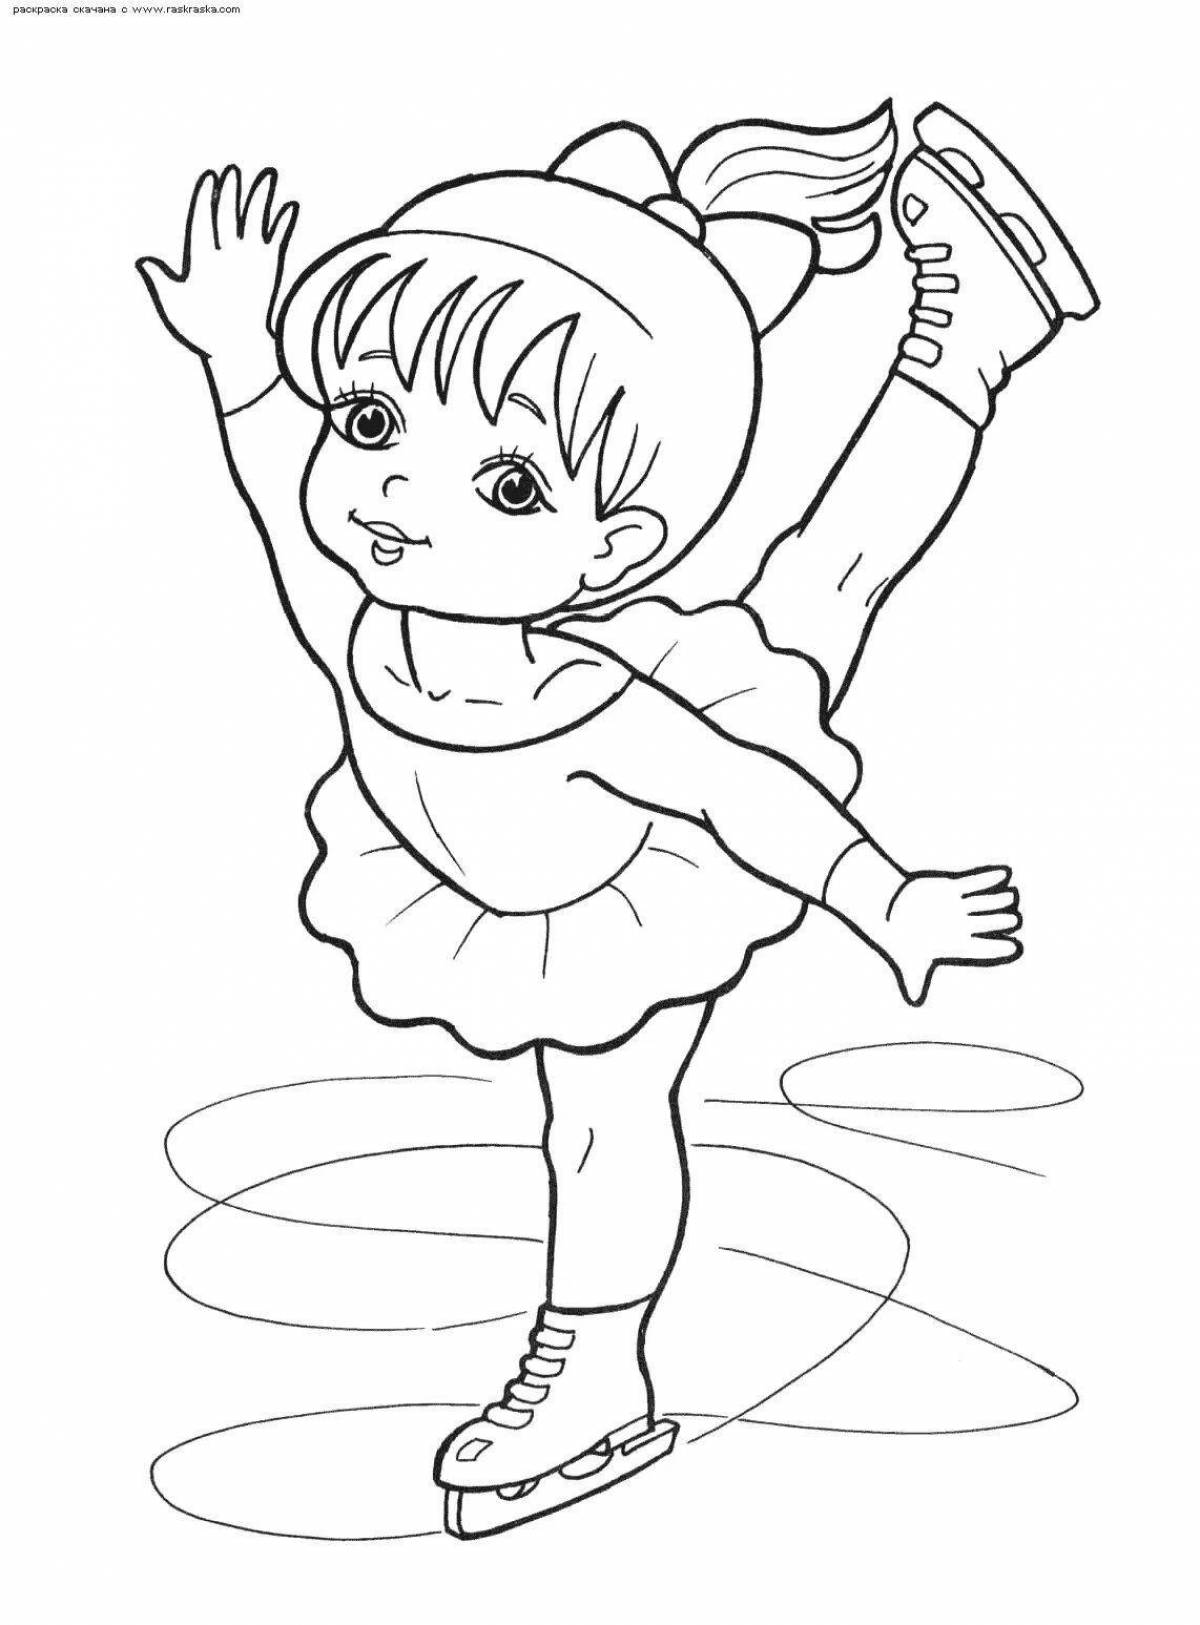 Fabulous sports coloring pages for 5-6 year olds